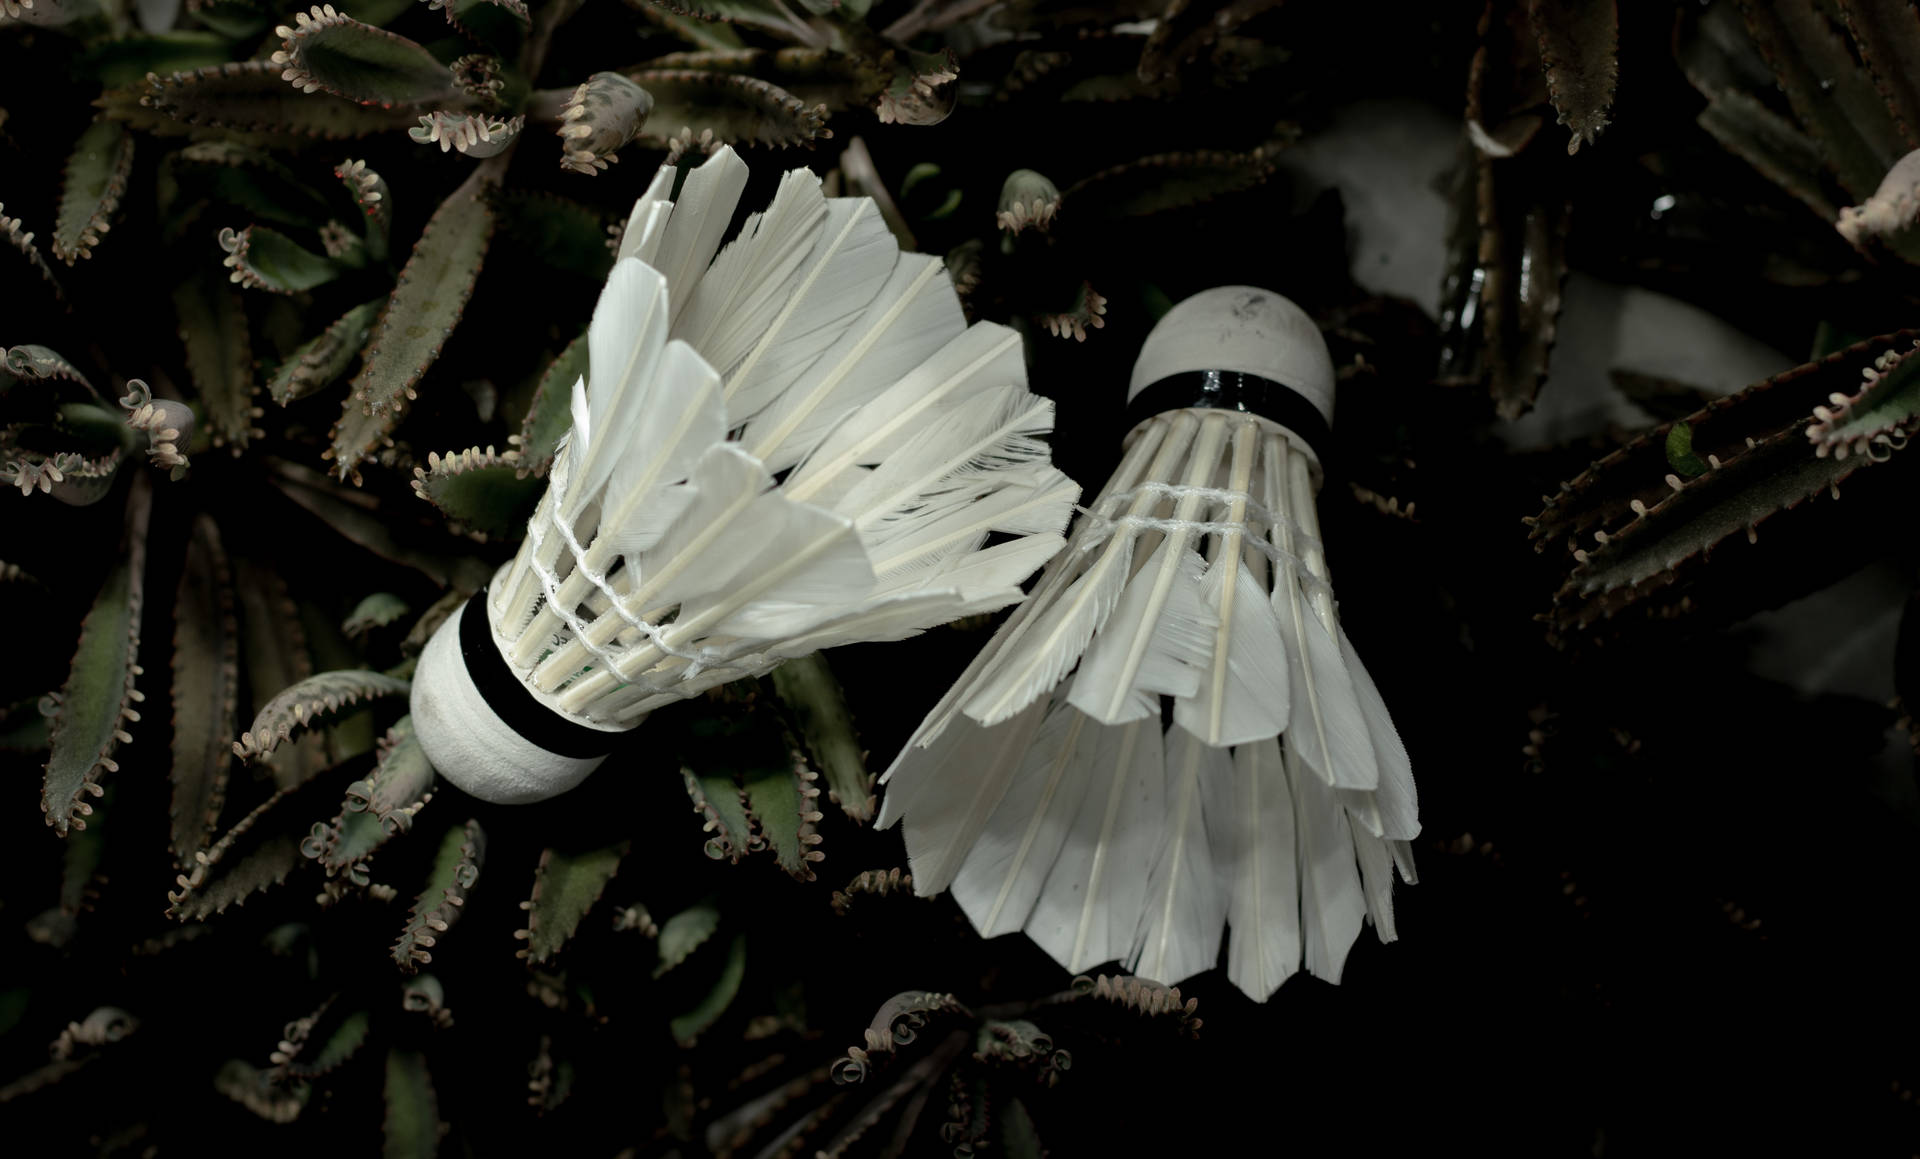 Badminton 5999X3623 Wallpaper and Background Image